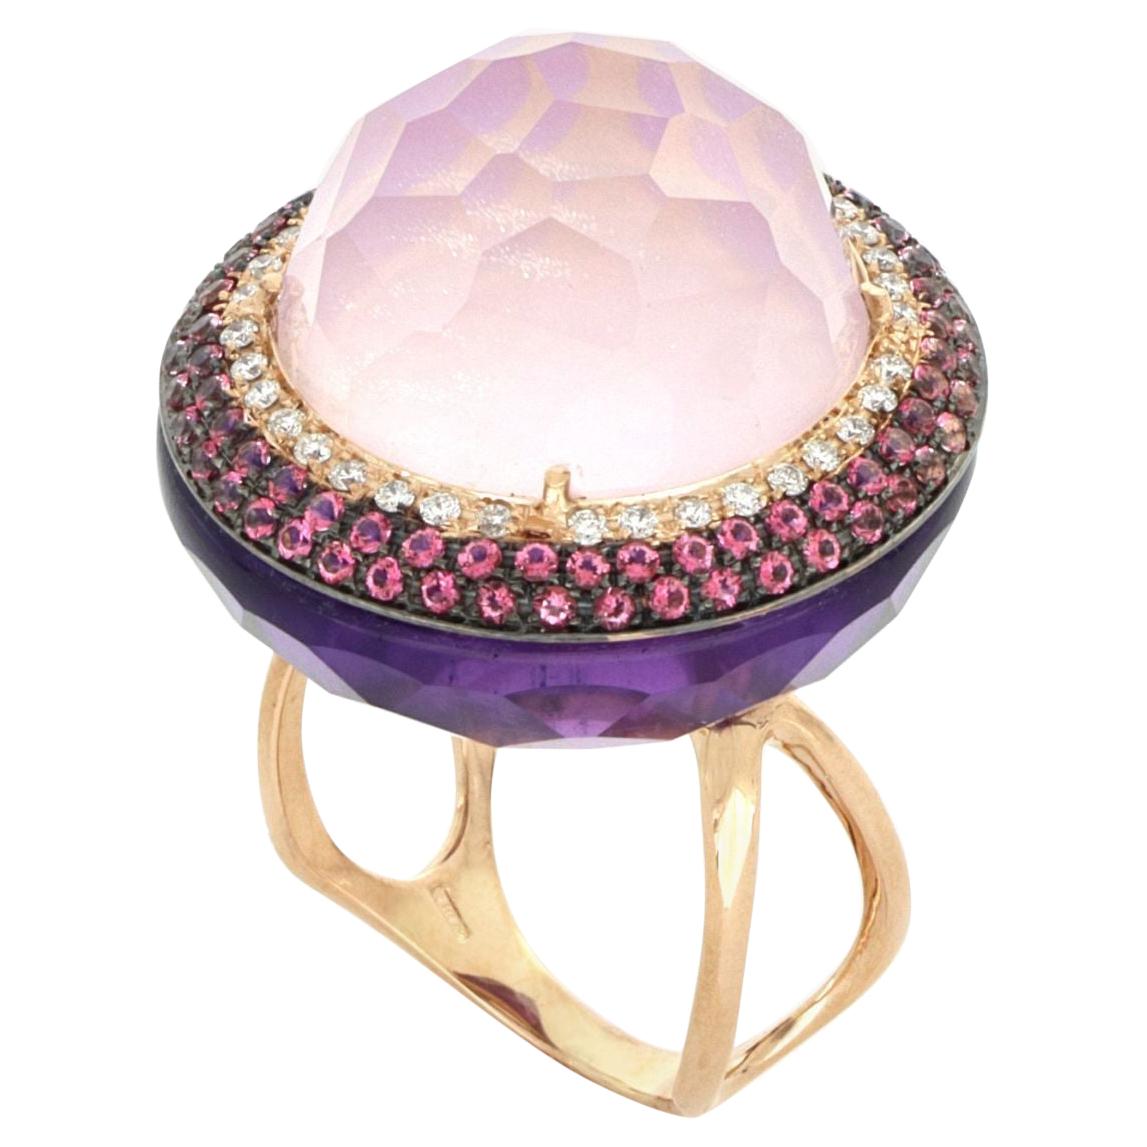 18kt Rose Gold Les Bonbons Big Pink Rounded Cocktail Ring with Diamonds